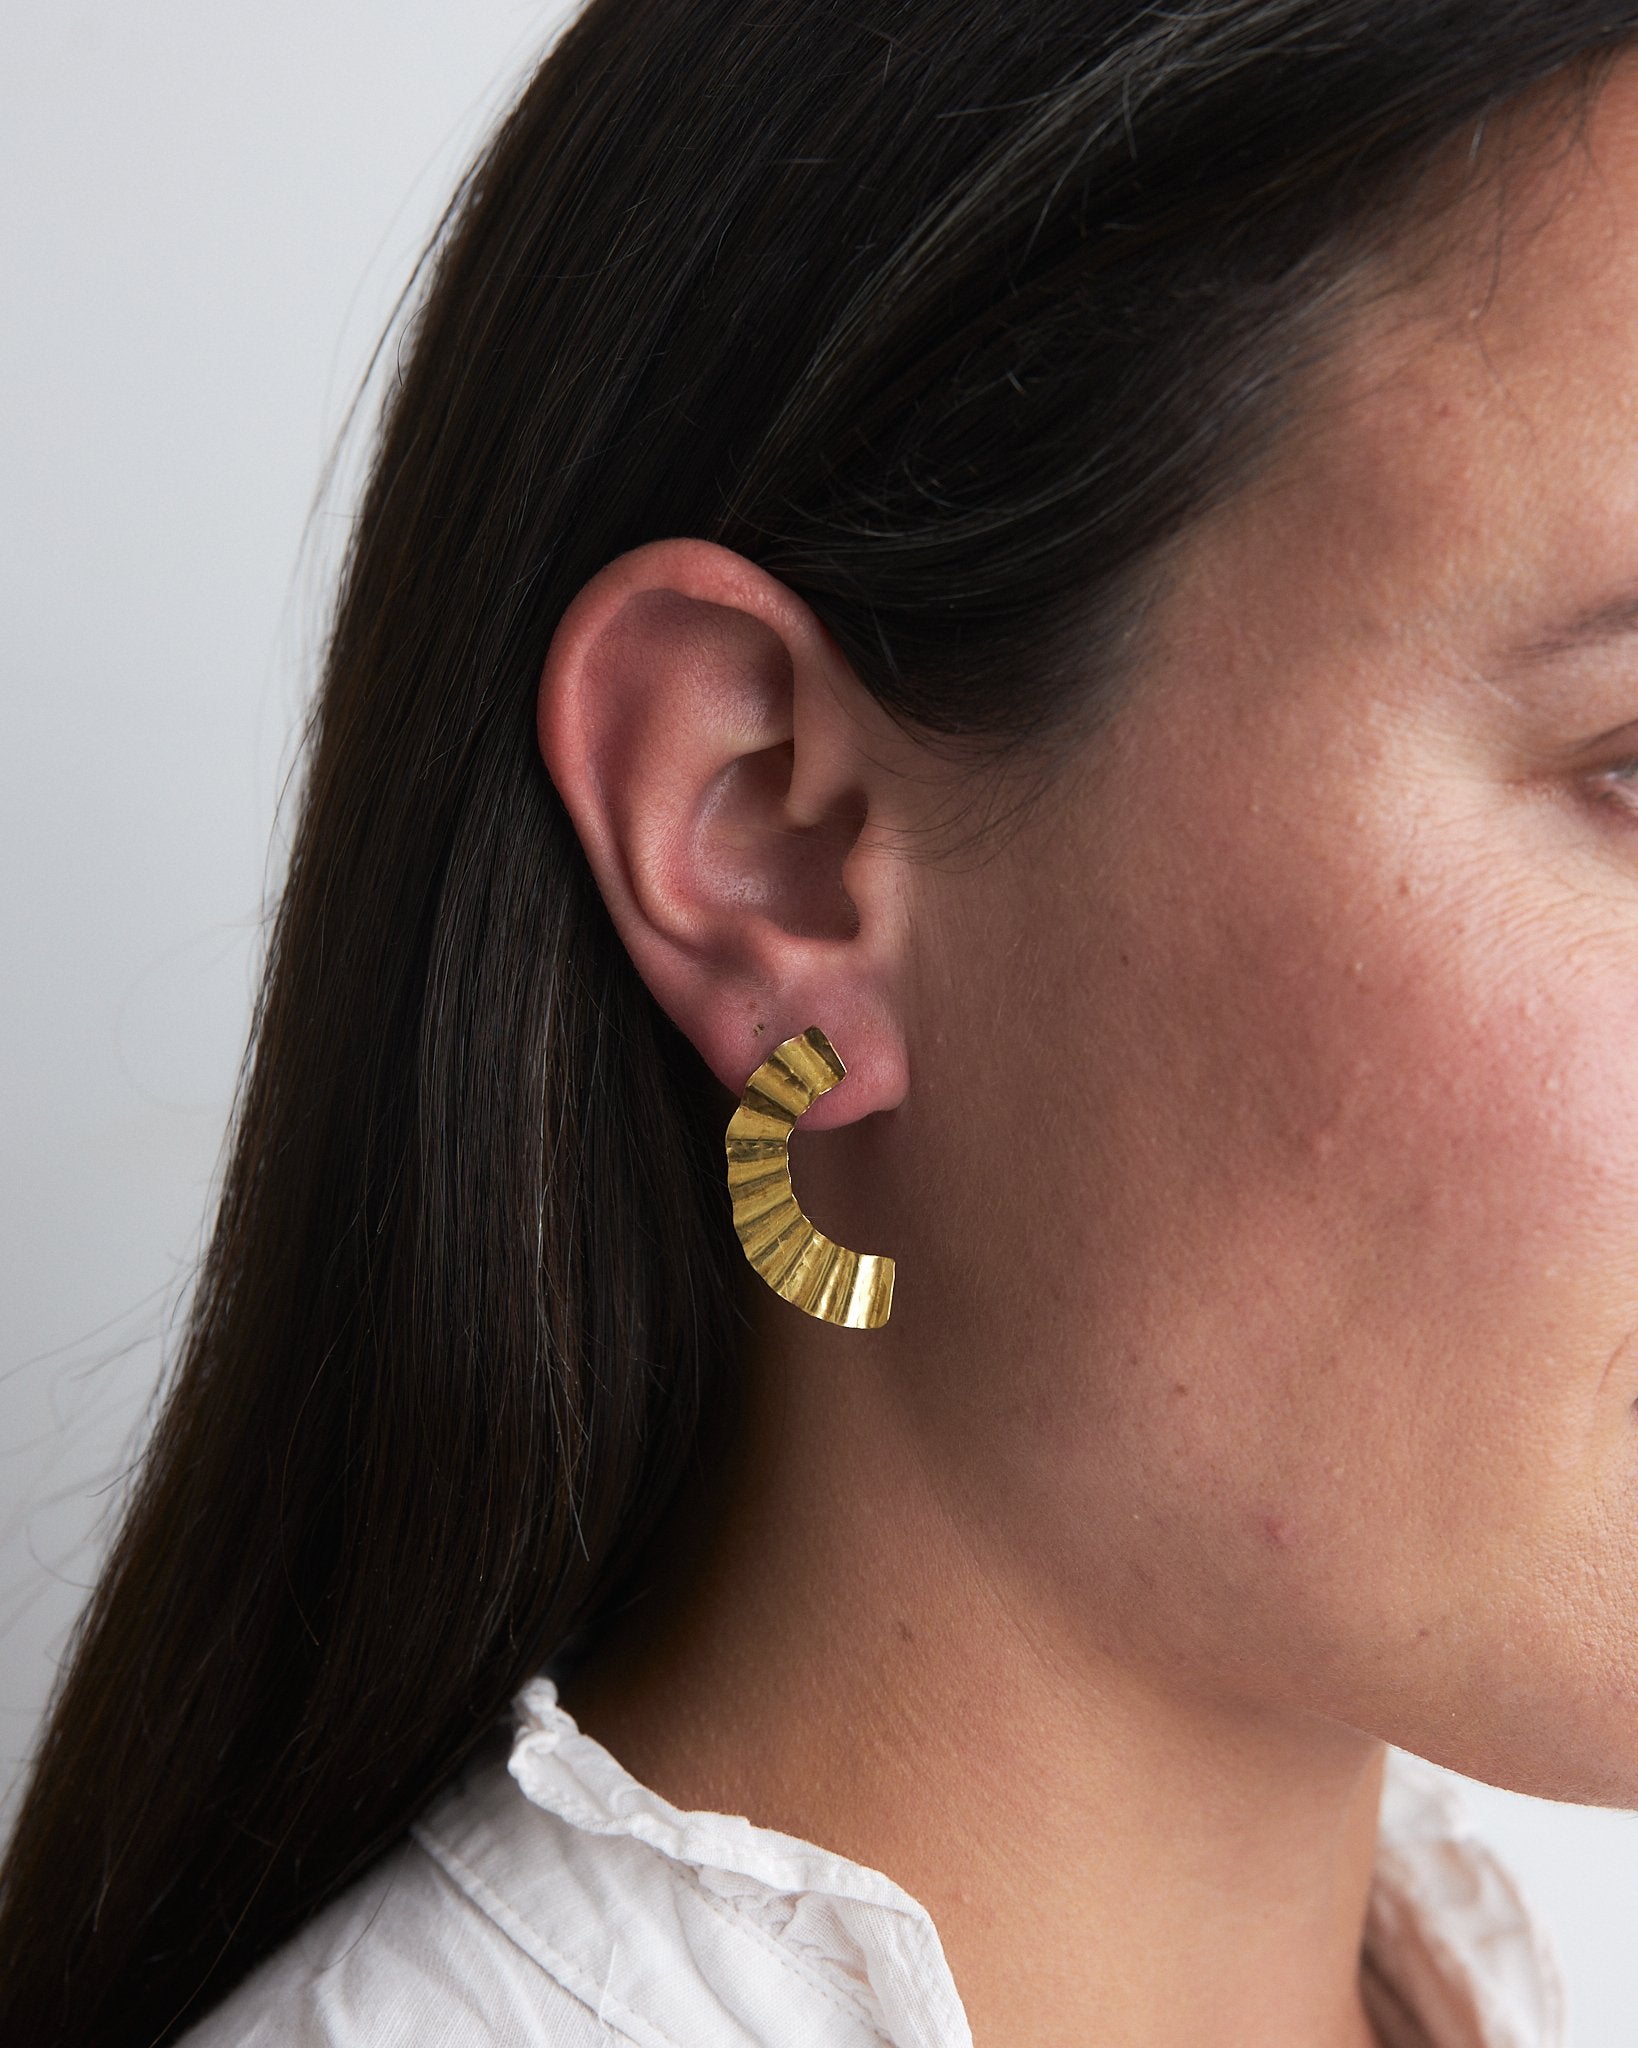 Handmade recycled brass earrings reminiscent of the rippling surface of a breeze across water, these studs have both rippling forms and curving shapes.